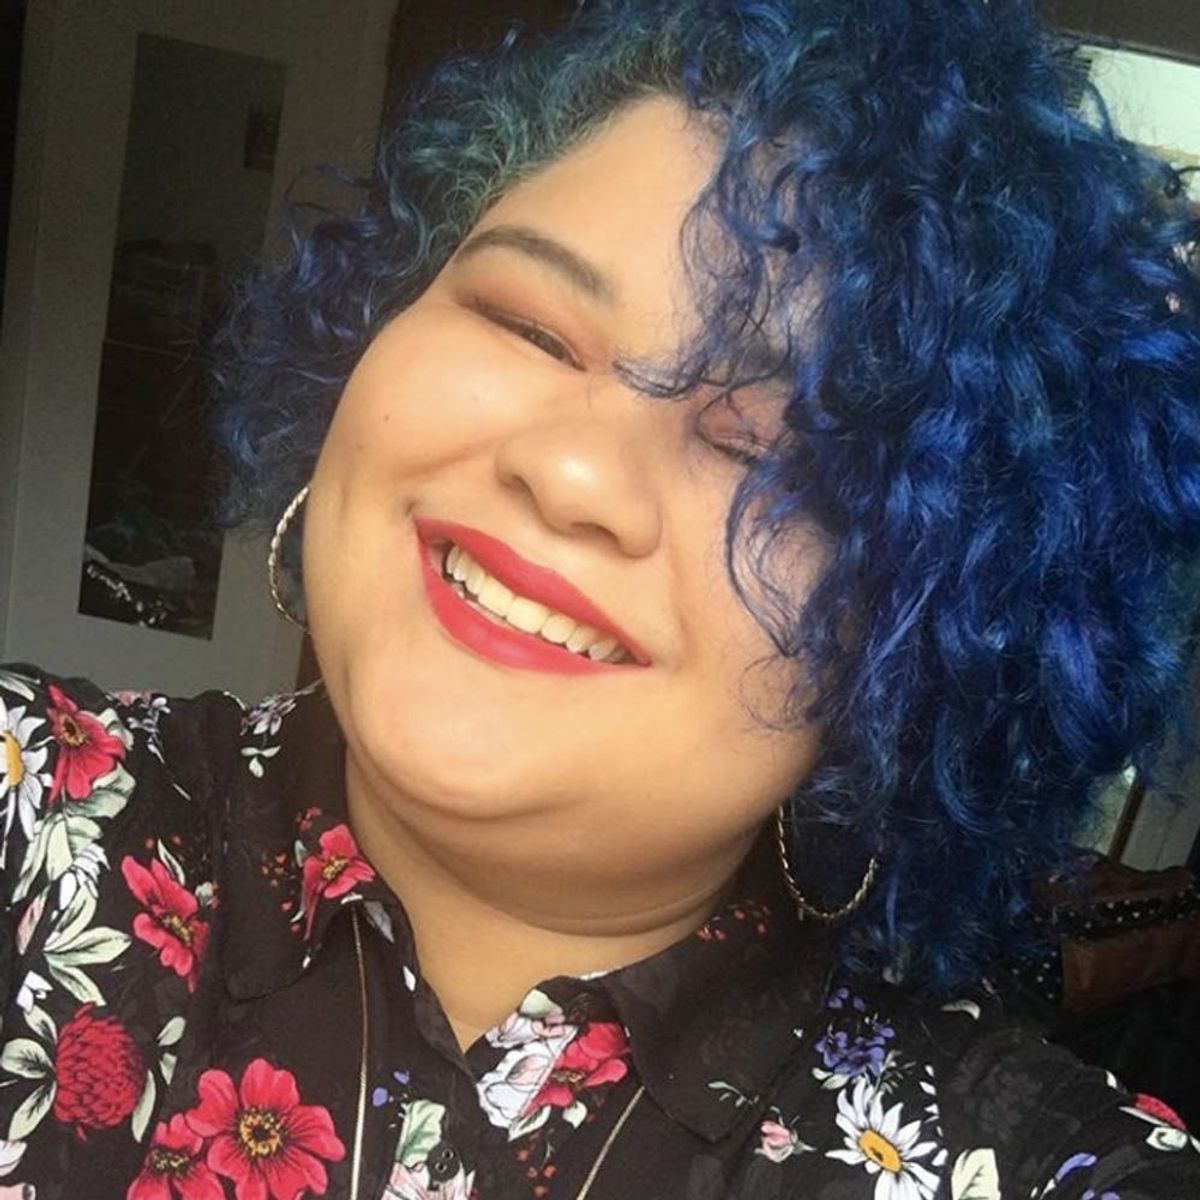 Outraged by a New Netflix Trailer, This 21-Year-Old YouTuber Launched the #MeToo of Fat Positivity